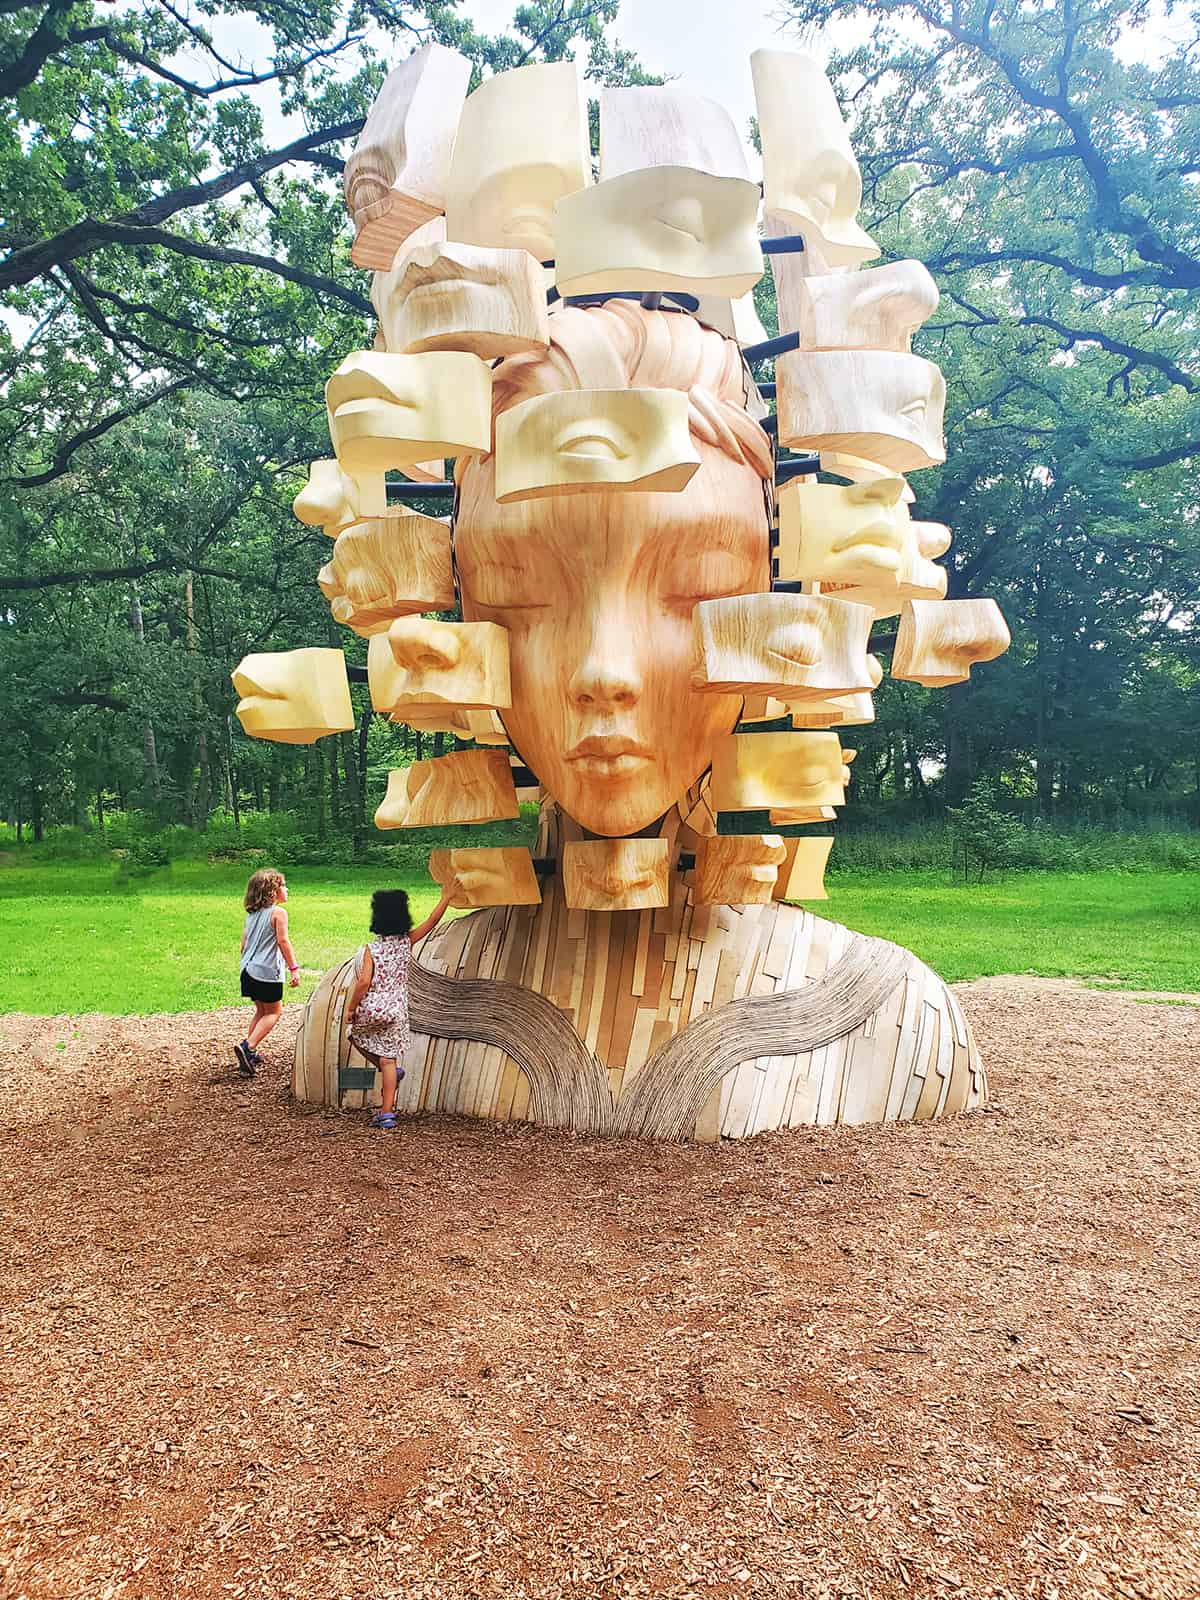 Morton Arboretum Sculpture with 2 girls playing - how to find nature in cities and urban areas